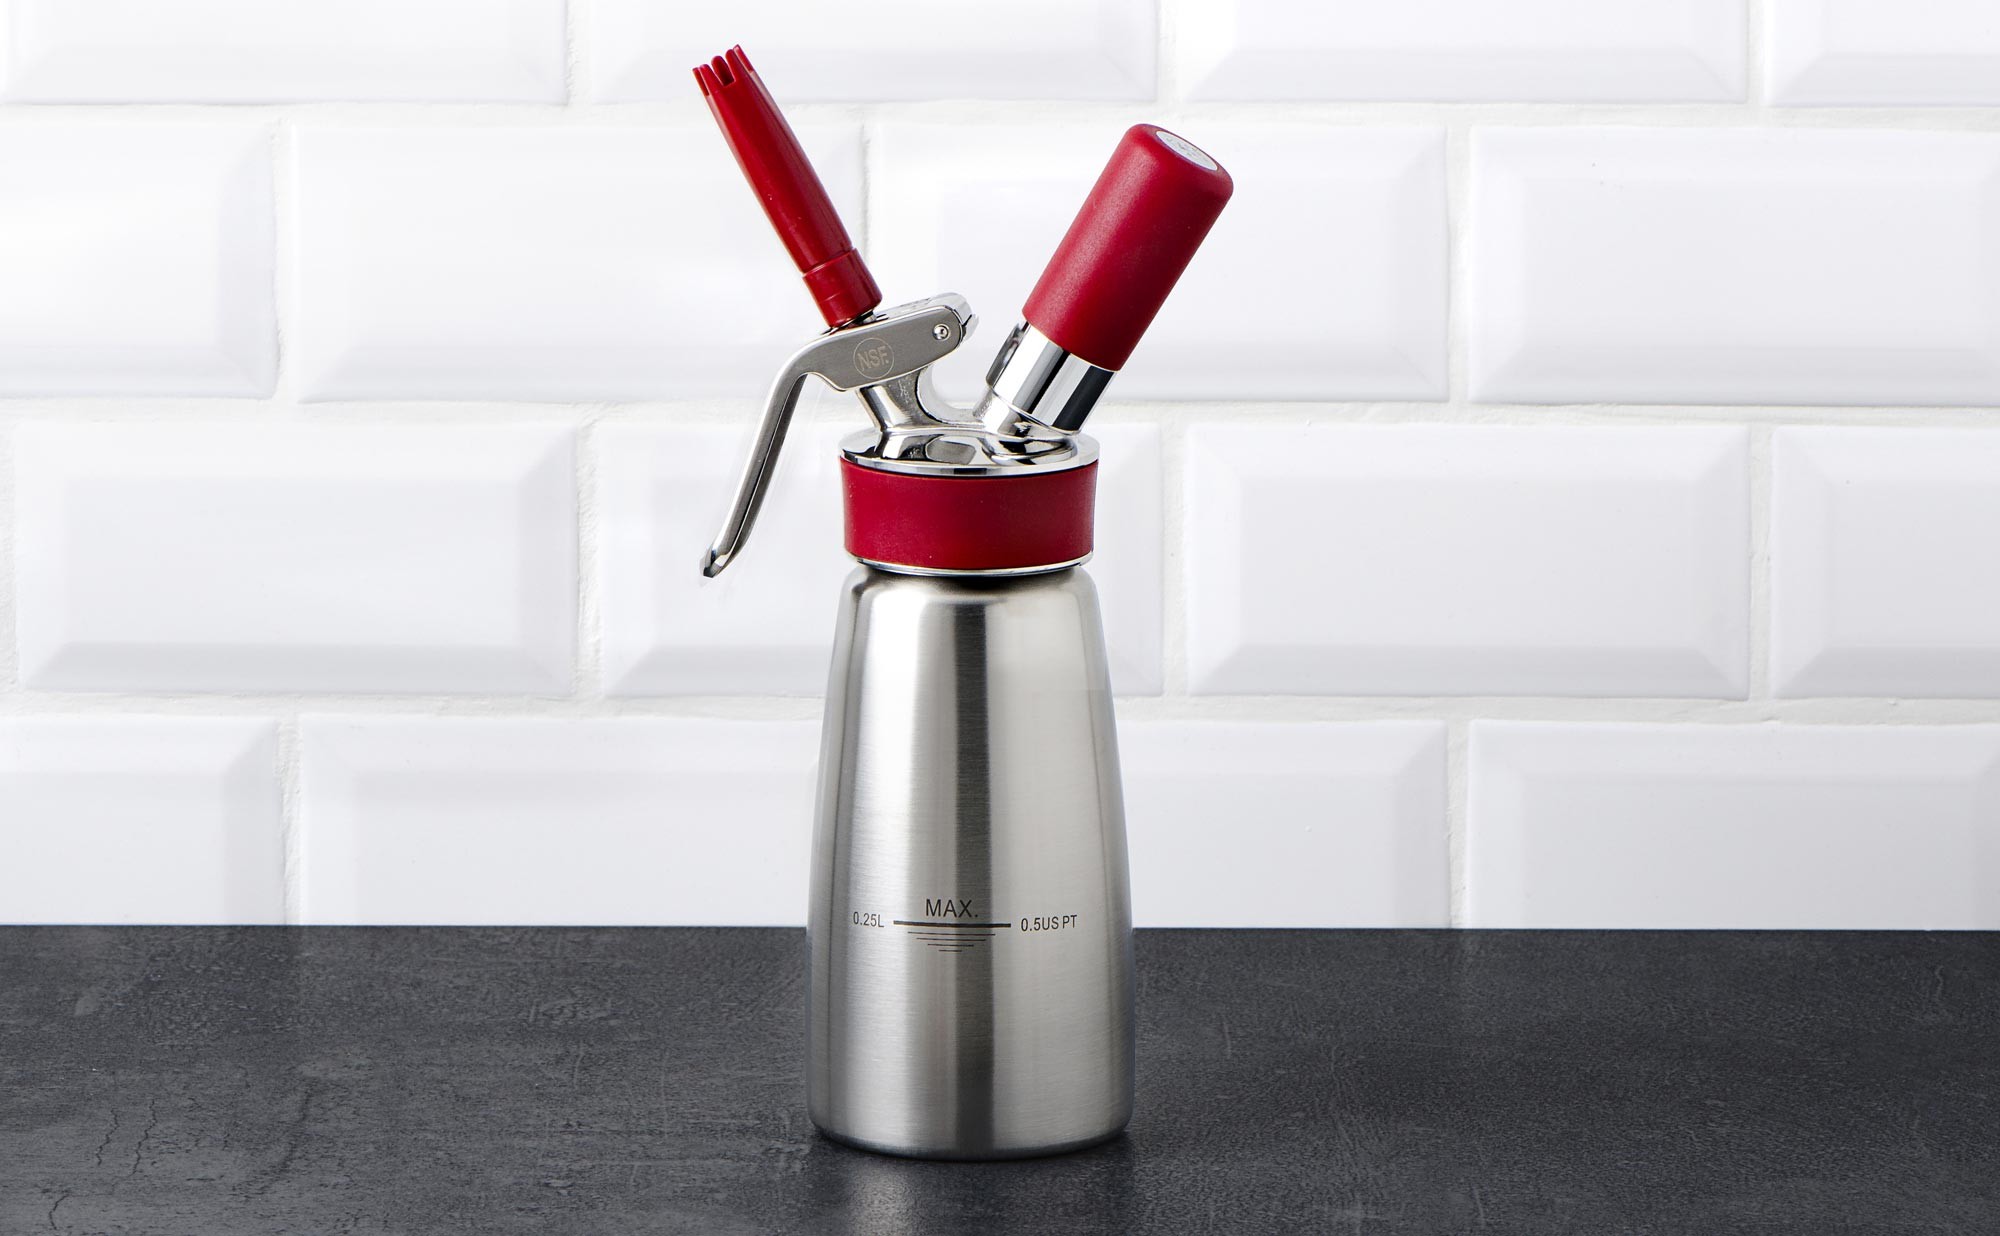 Tête complète inox Siphon Isi Gourmet / Thermo Whip